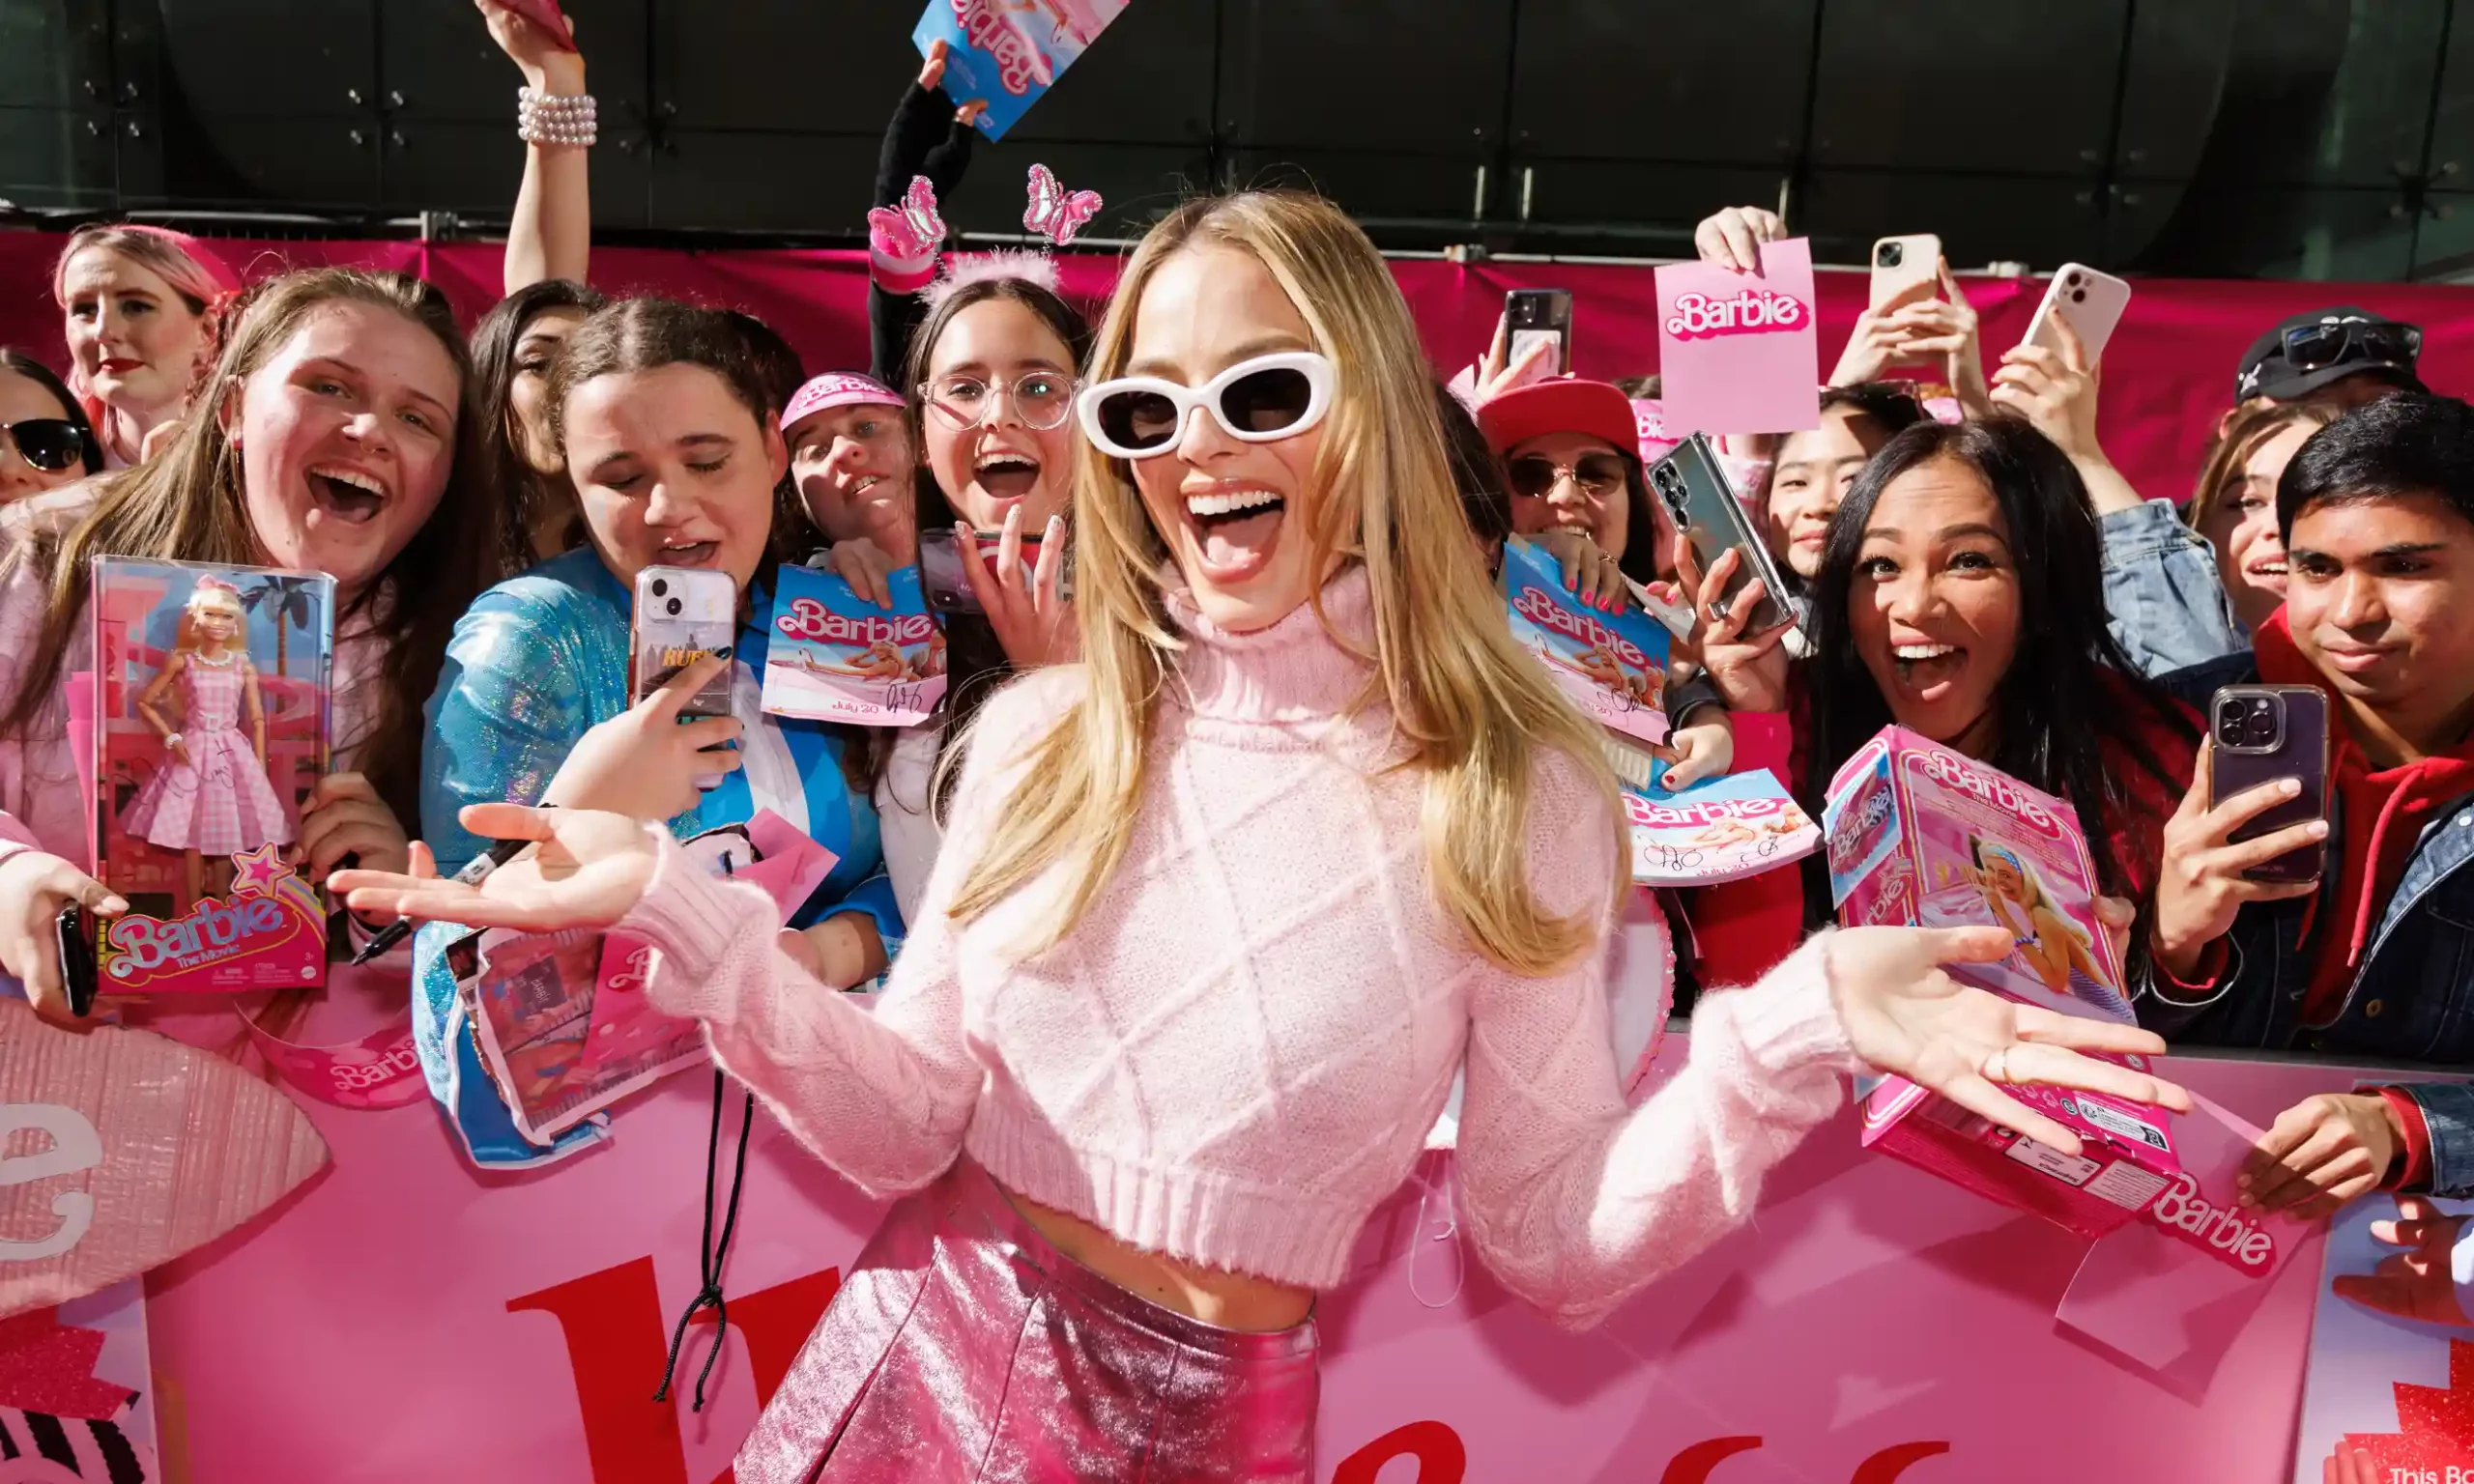 Come on Barbie: The Movie's Best Marketing Stunts